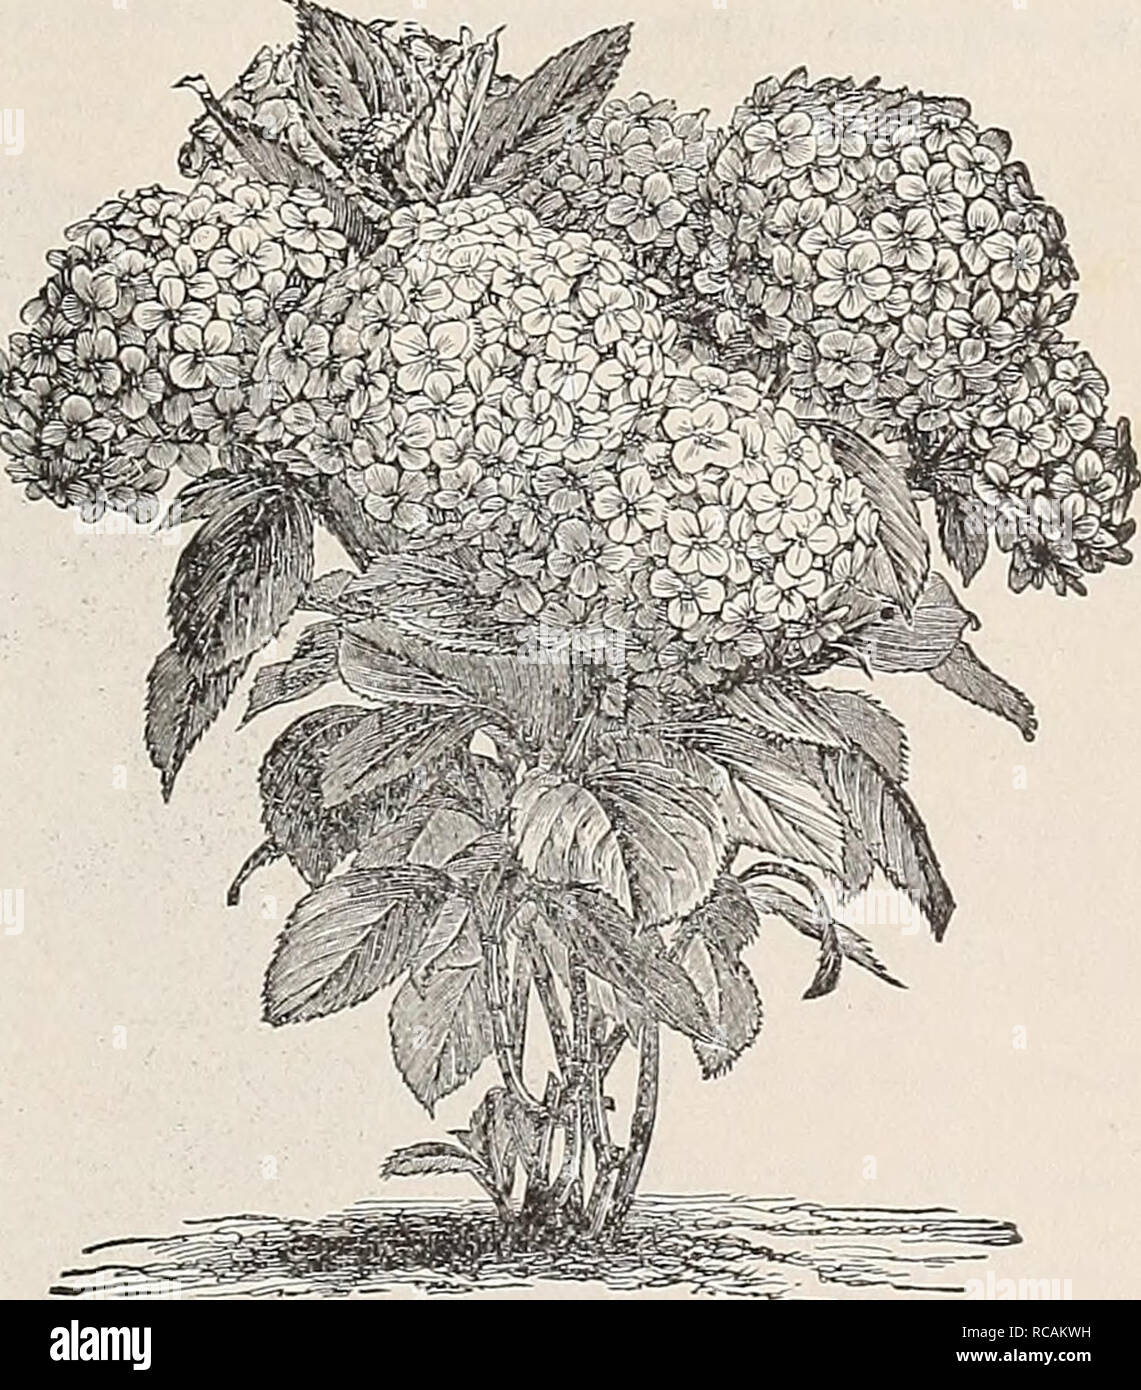 . Ellwanger &amp; Barry's general catalogue of fruit &amp; ornamental trees, roses etc. GENERAL CATALOGUE. 87 HIBISCUS. Althaea, or Rose of Sliaron. Eibisch, Ger. Guimauve, Fr. The Althteas are fine, free-g-rowing, flowering shrubs, of the easiest cultivation. Very desirable on account of Dlooming in August and September, when scarcely any other tree or shrub is in blossom. H. Syriaciis var. Boule de Feu. C. Large, very double, well-formed flowei-s, of a beautiful violet red color. Plant vigorous; flowers late. 3.5c. var. flore pleno fol. var. Variegated-leaved Bouble Purple-flowered Alth^a. C Stock Photo